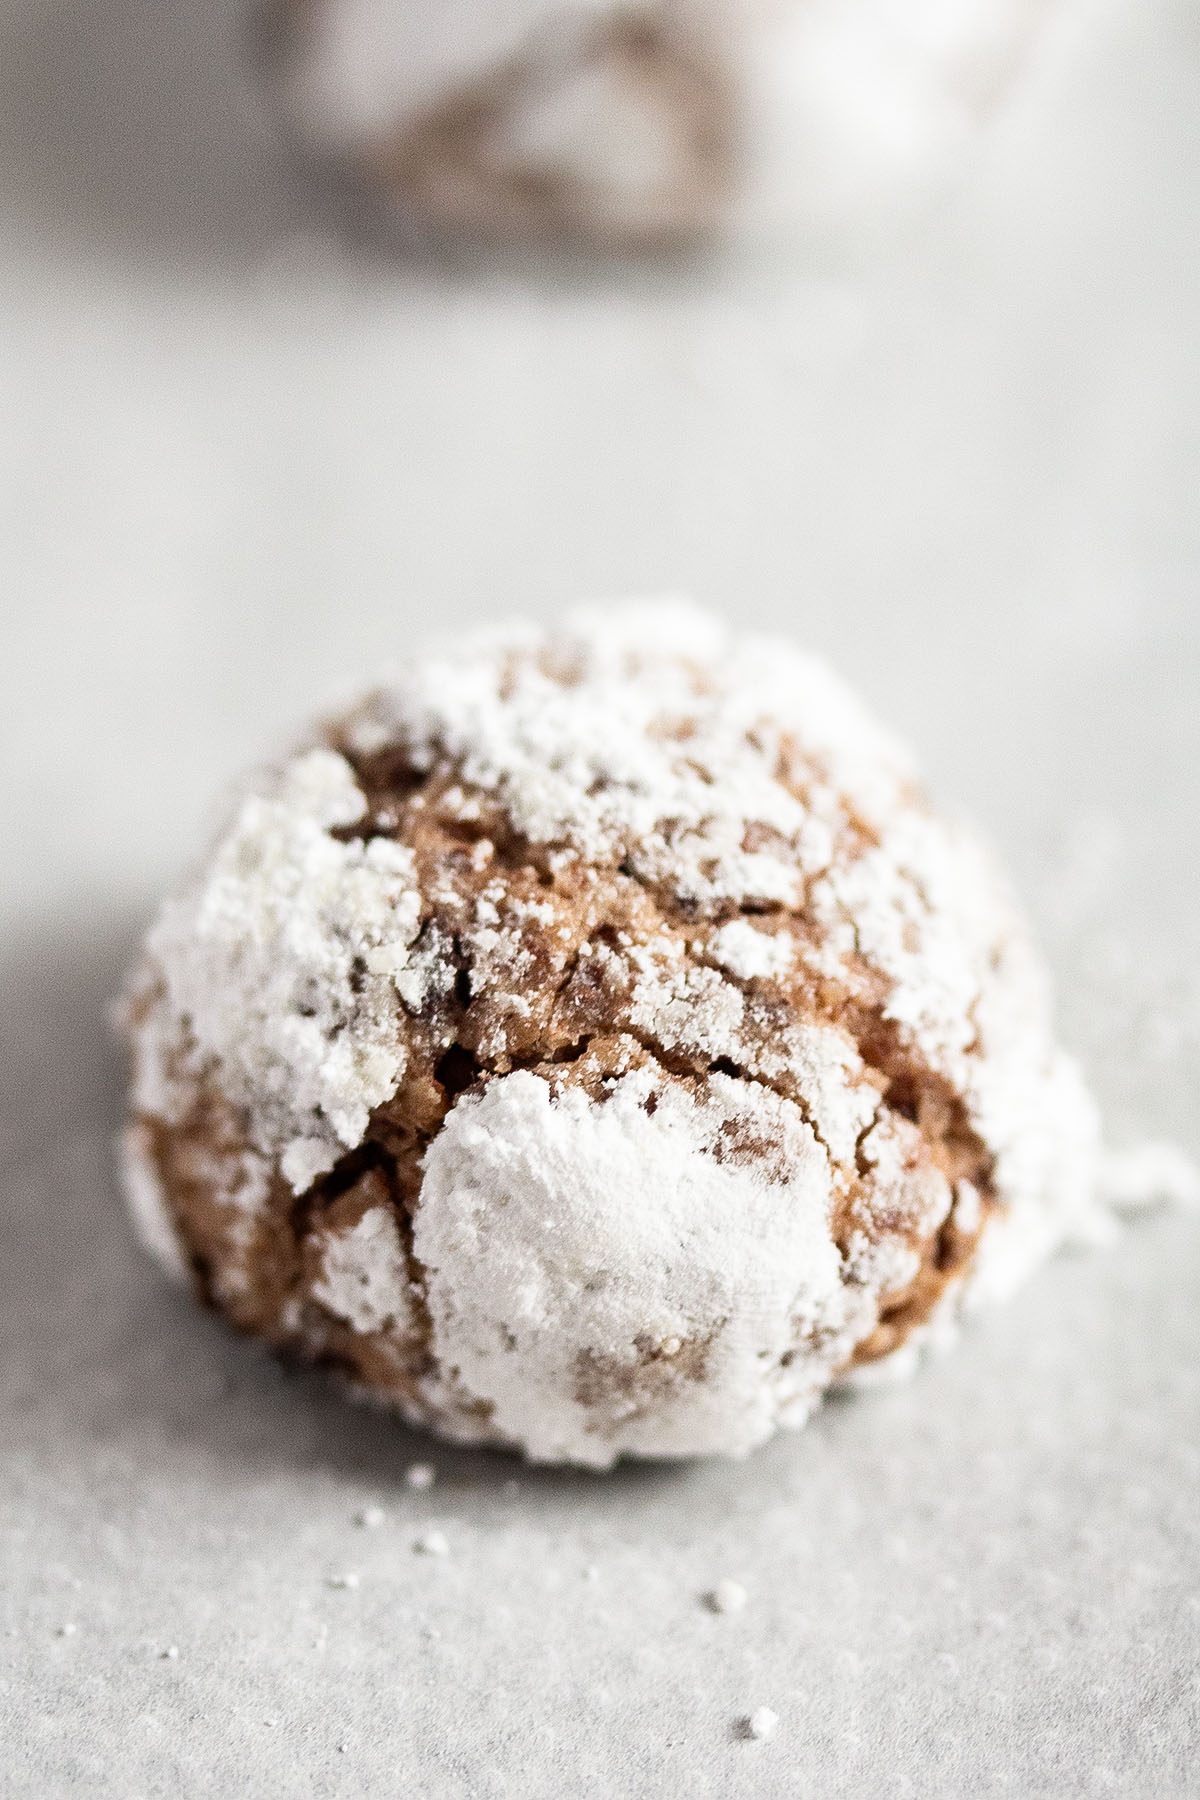 one crinkled cookie dusted in icing sugar on a white surface.